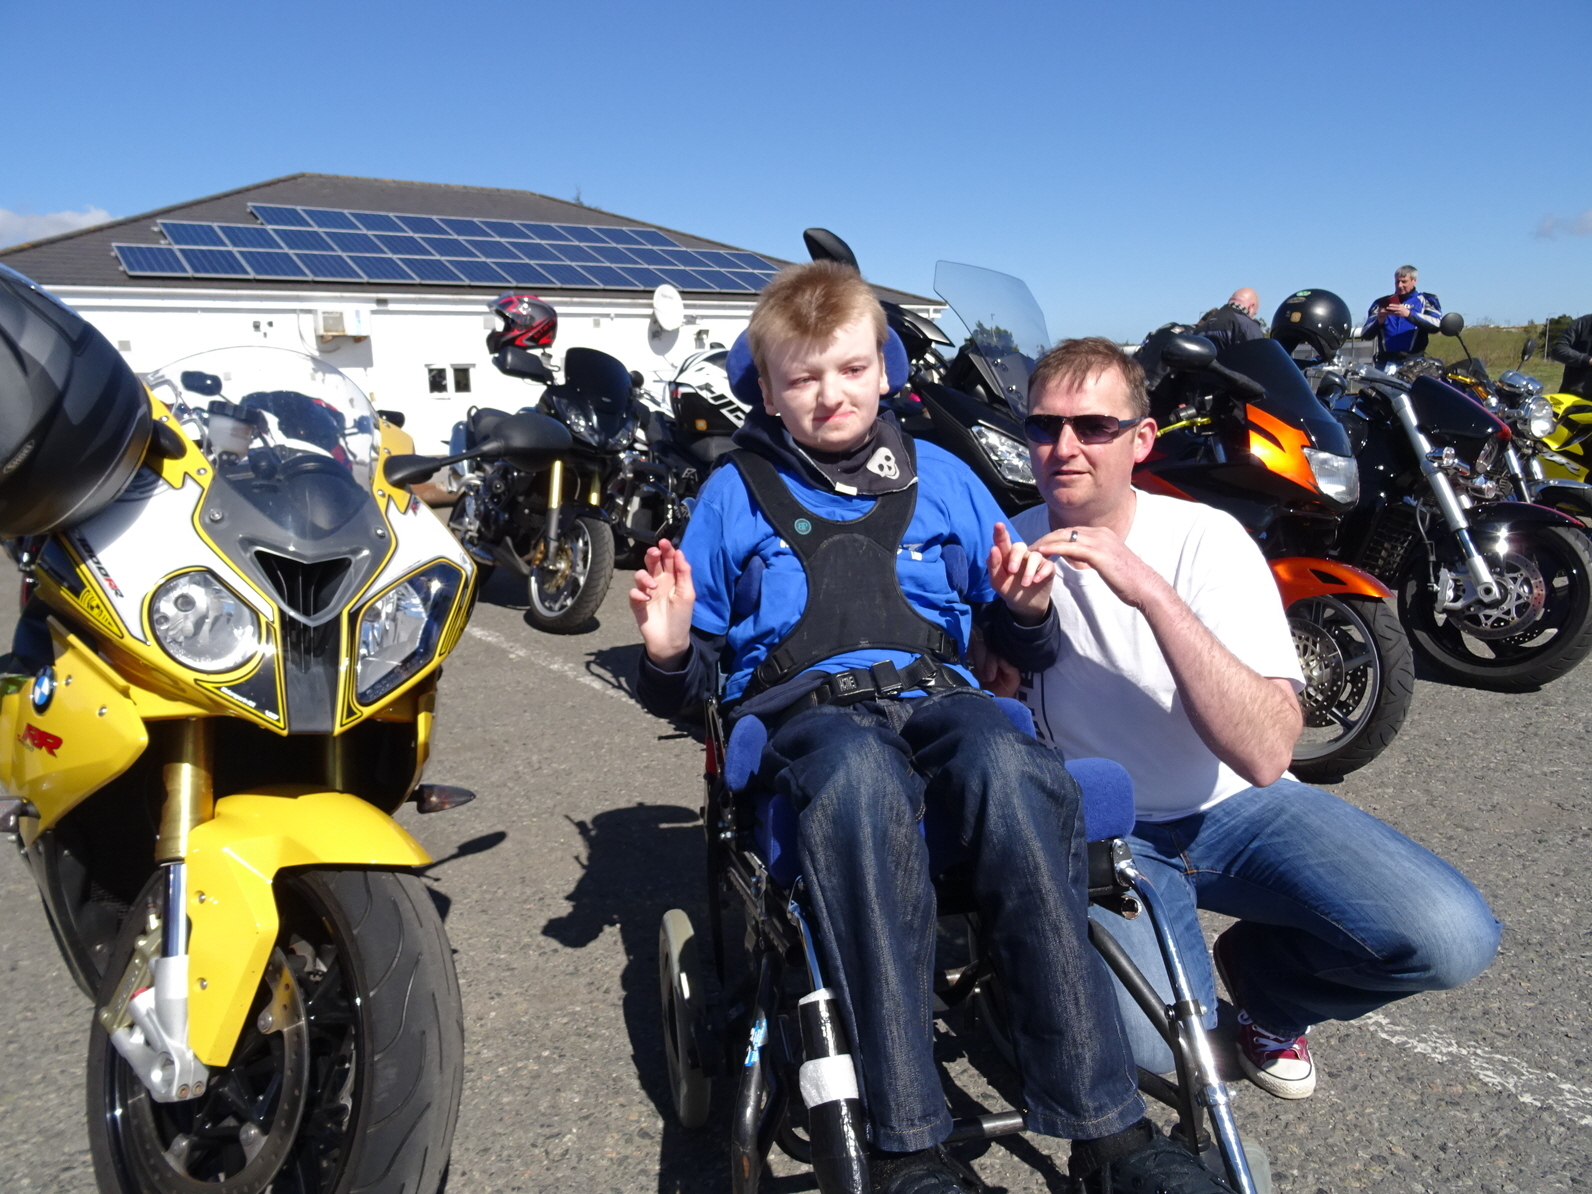 Calum and dad Andy were overwhelmed by the turnout of bikes and bikers at Englebret Filling Station